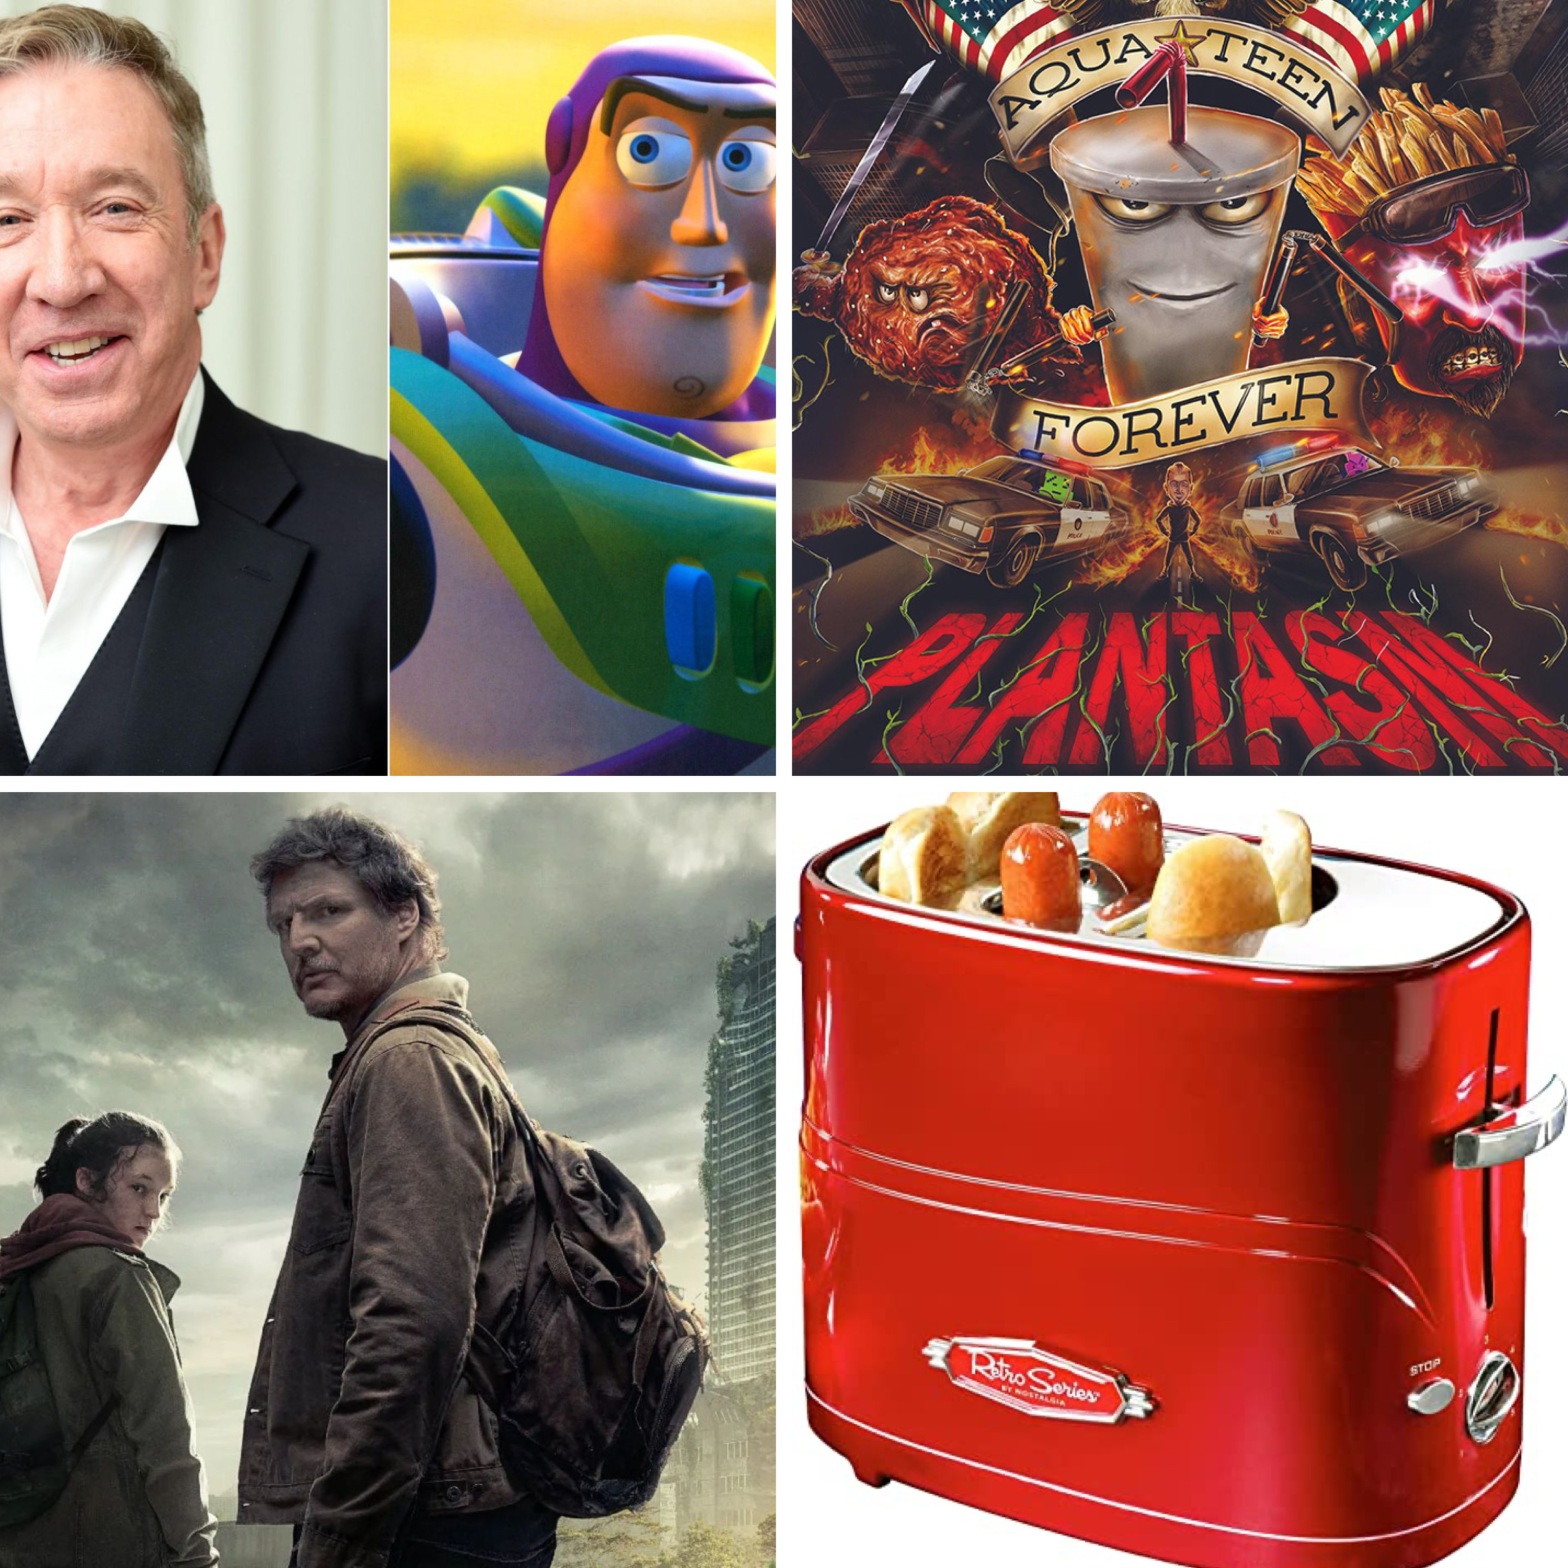 Tim Allen and Buzz Lightyear, Aqua Teen Forever: Plantasm, HBO's The Last of Us, and a hot dog and bun toaster thing.